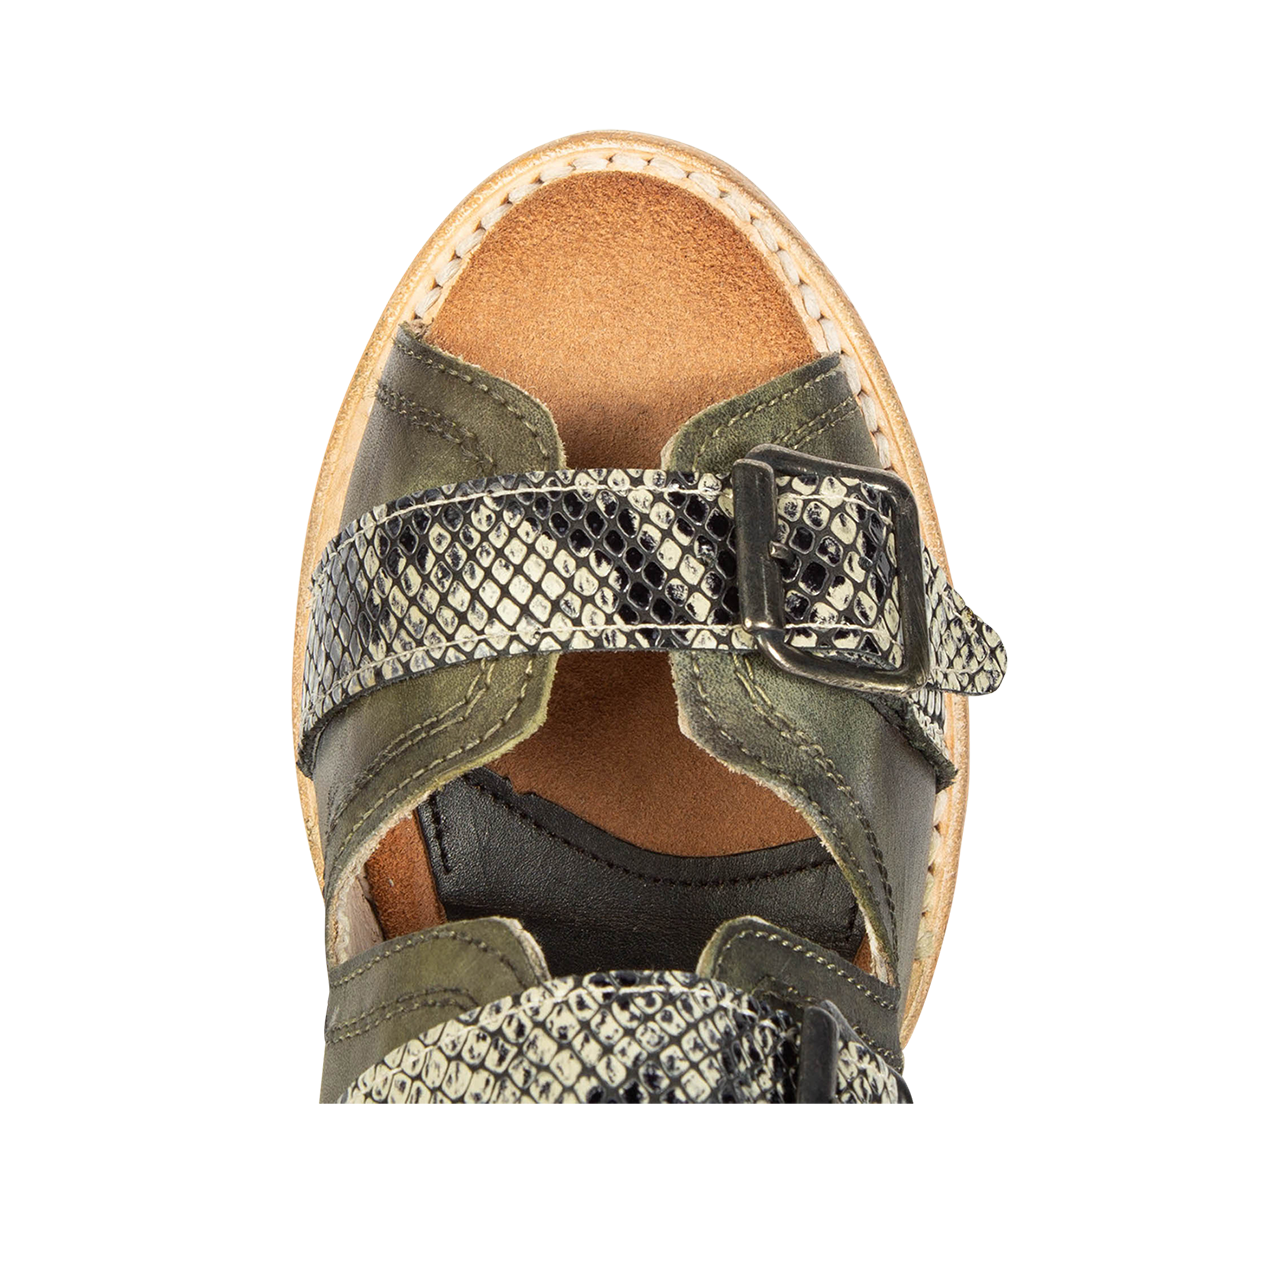 Top view showing leather strap buckle detailing FREEBIRD women's Caprice green snake multi sandal